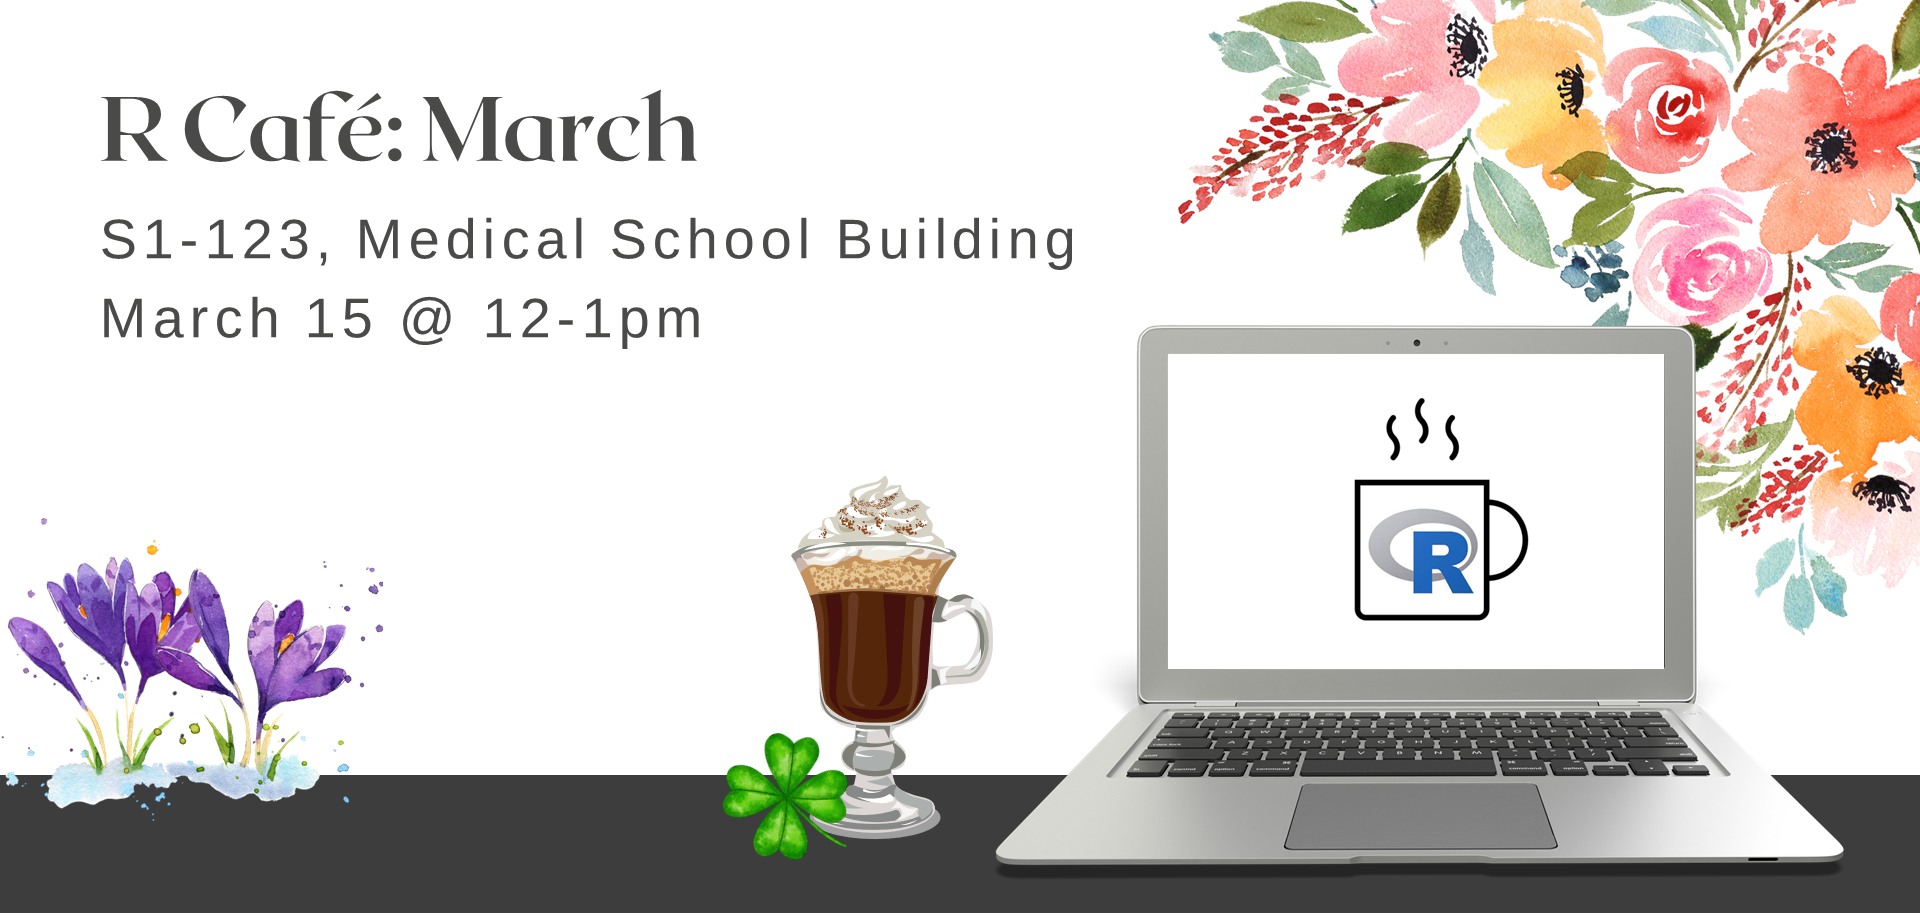 laptop with R Café logo, next to a mug of coffee, a four-leaf clover, and crocuses blooming in snow with a background of blooming flowers with text: R Café March. S1-123, Medical School Building. March 15 at 12 to 1pm